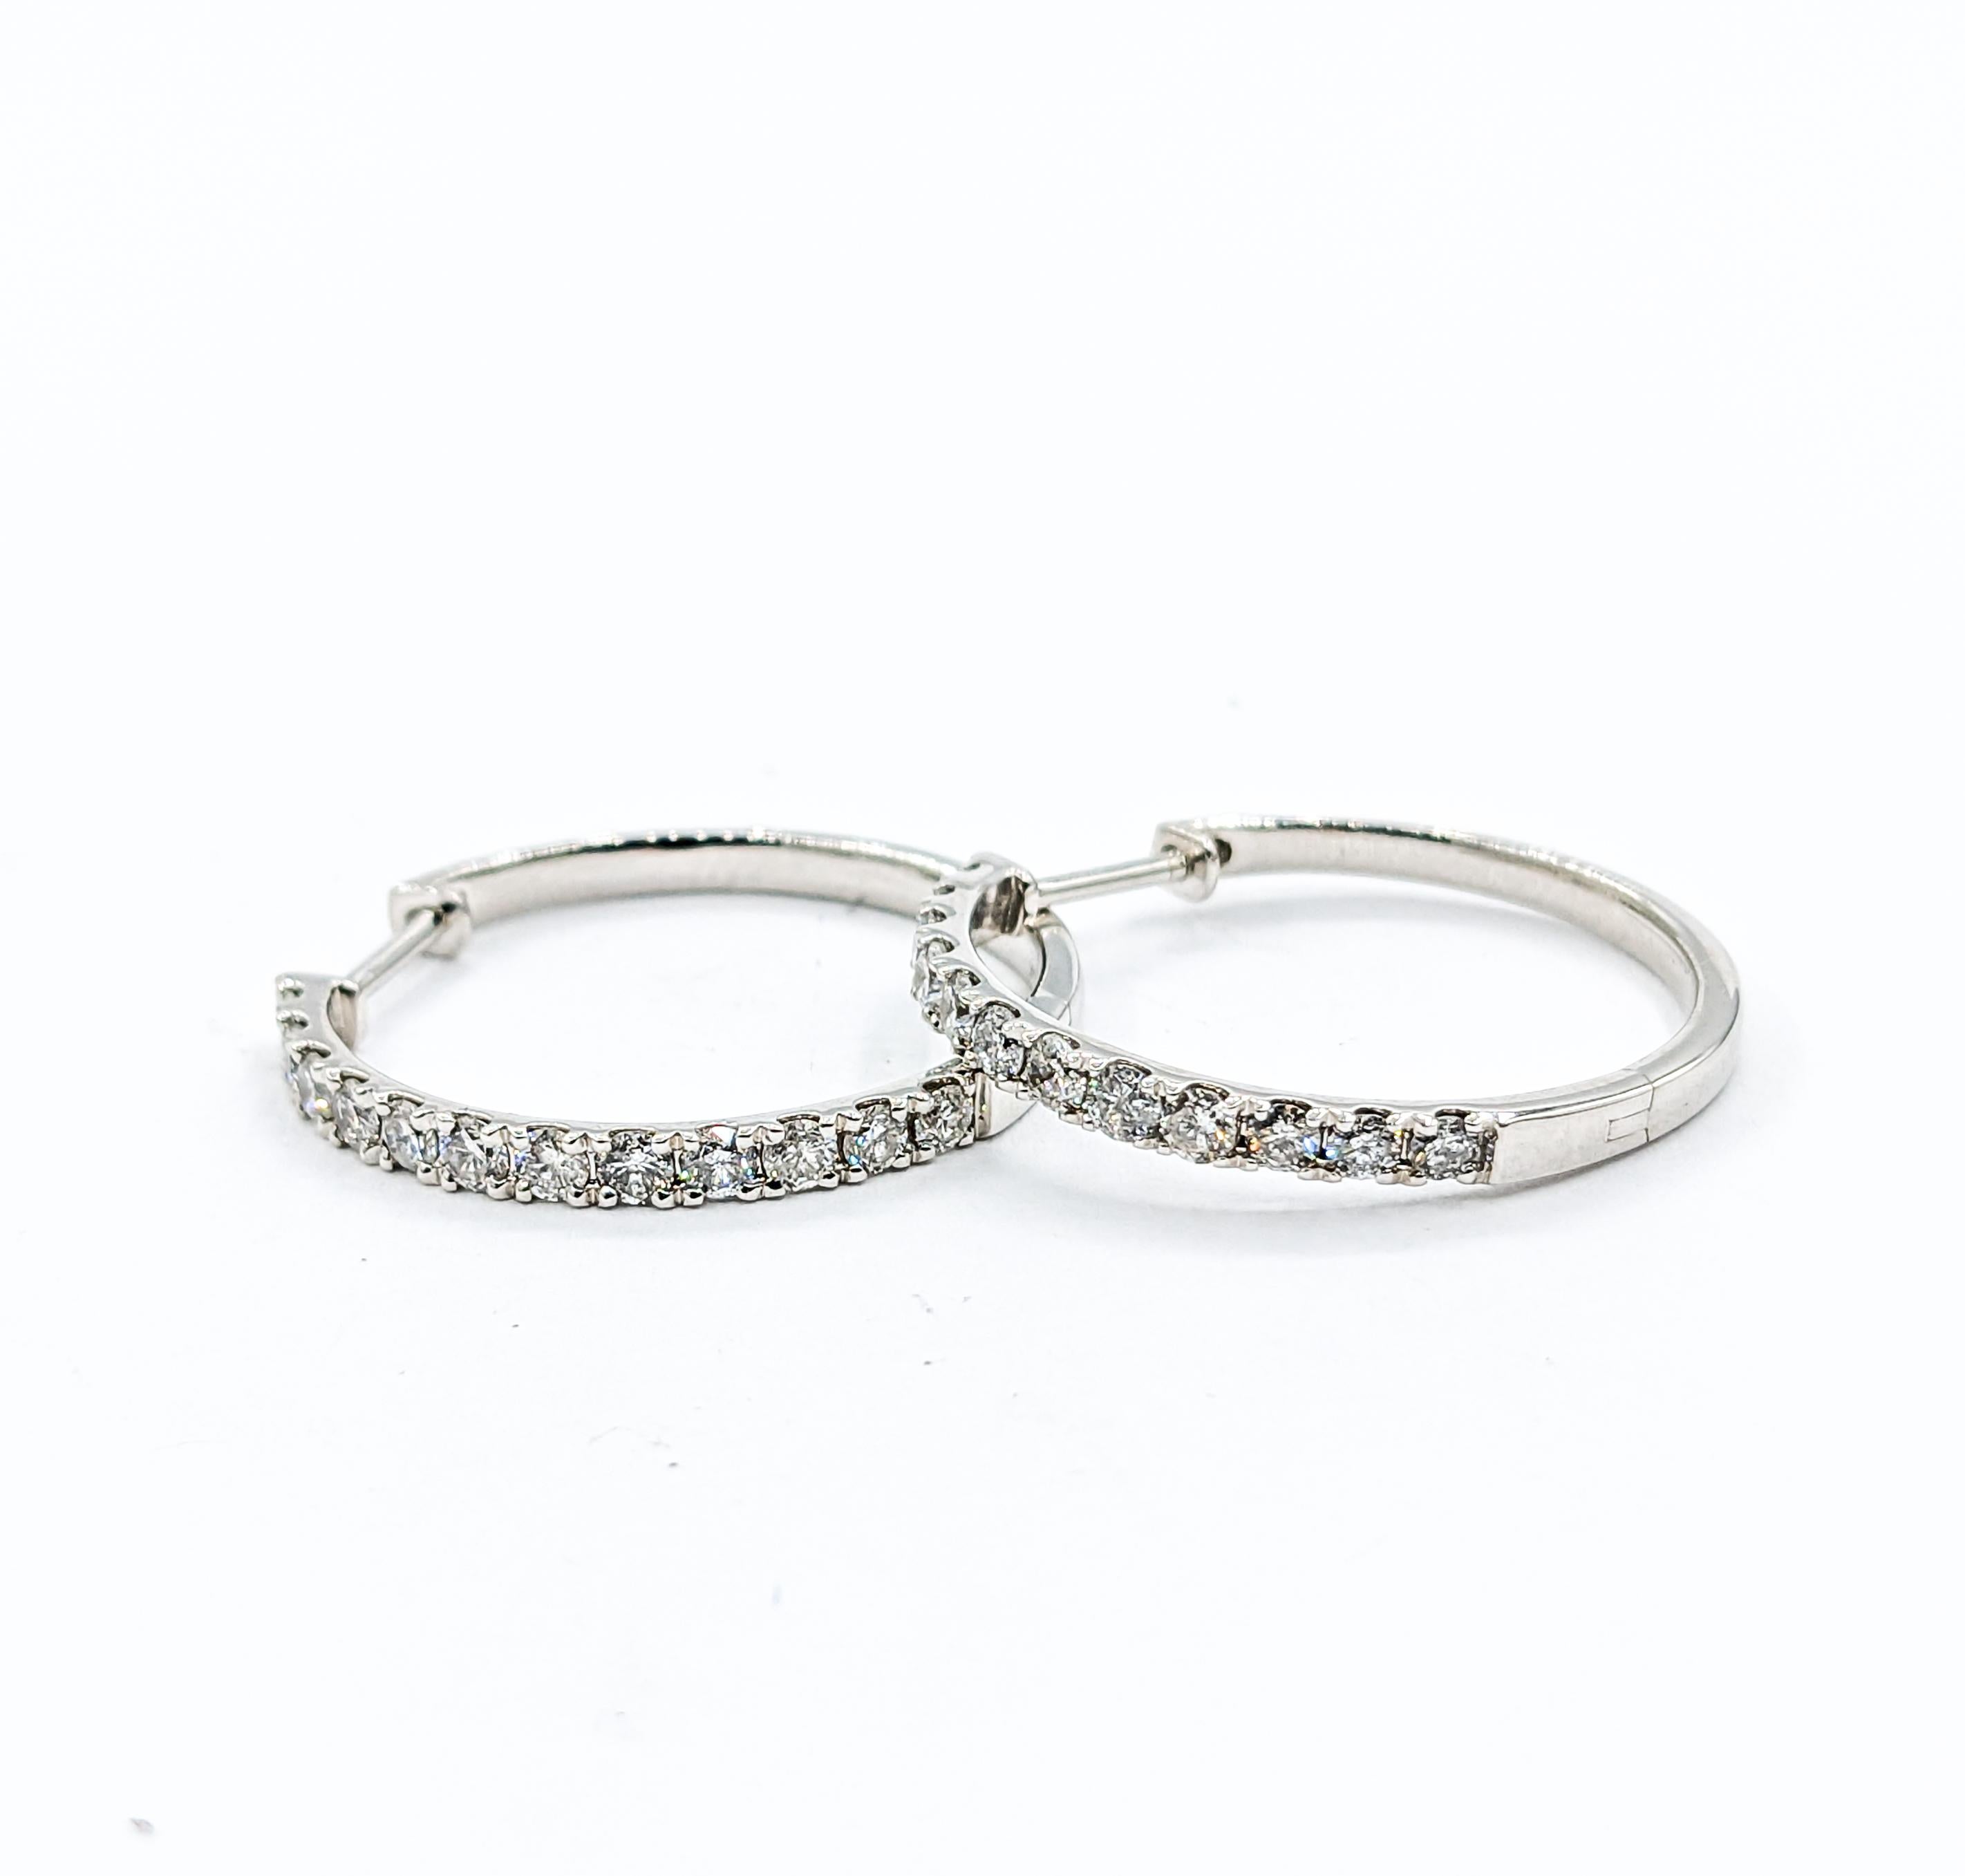 Classic 1.00ctw Round Diamond Hoop Earrings

Presenting our exquisite hoop earrings, meticulously crafted in 10k white gold, adorned with a dazzling display of 1.0c0tw round diamonds. These mesmerizing diamonds boast an impressive I clarity and near